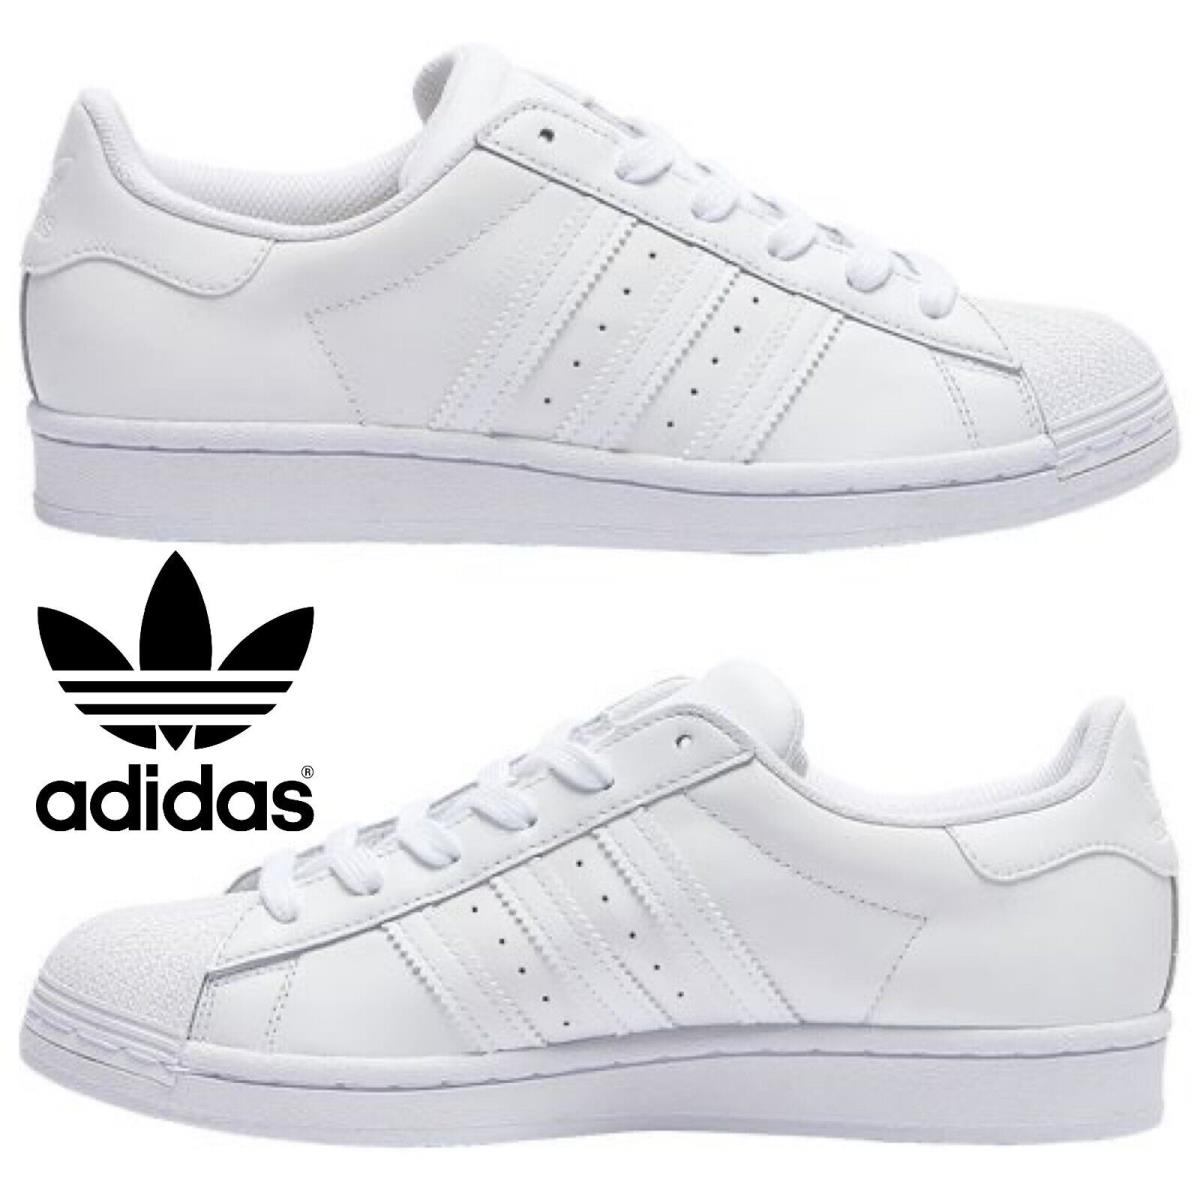 Adidas Originals Superstar Women s Sneakers Casual Shoes Sport Gym White